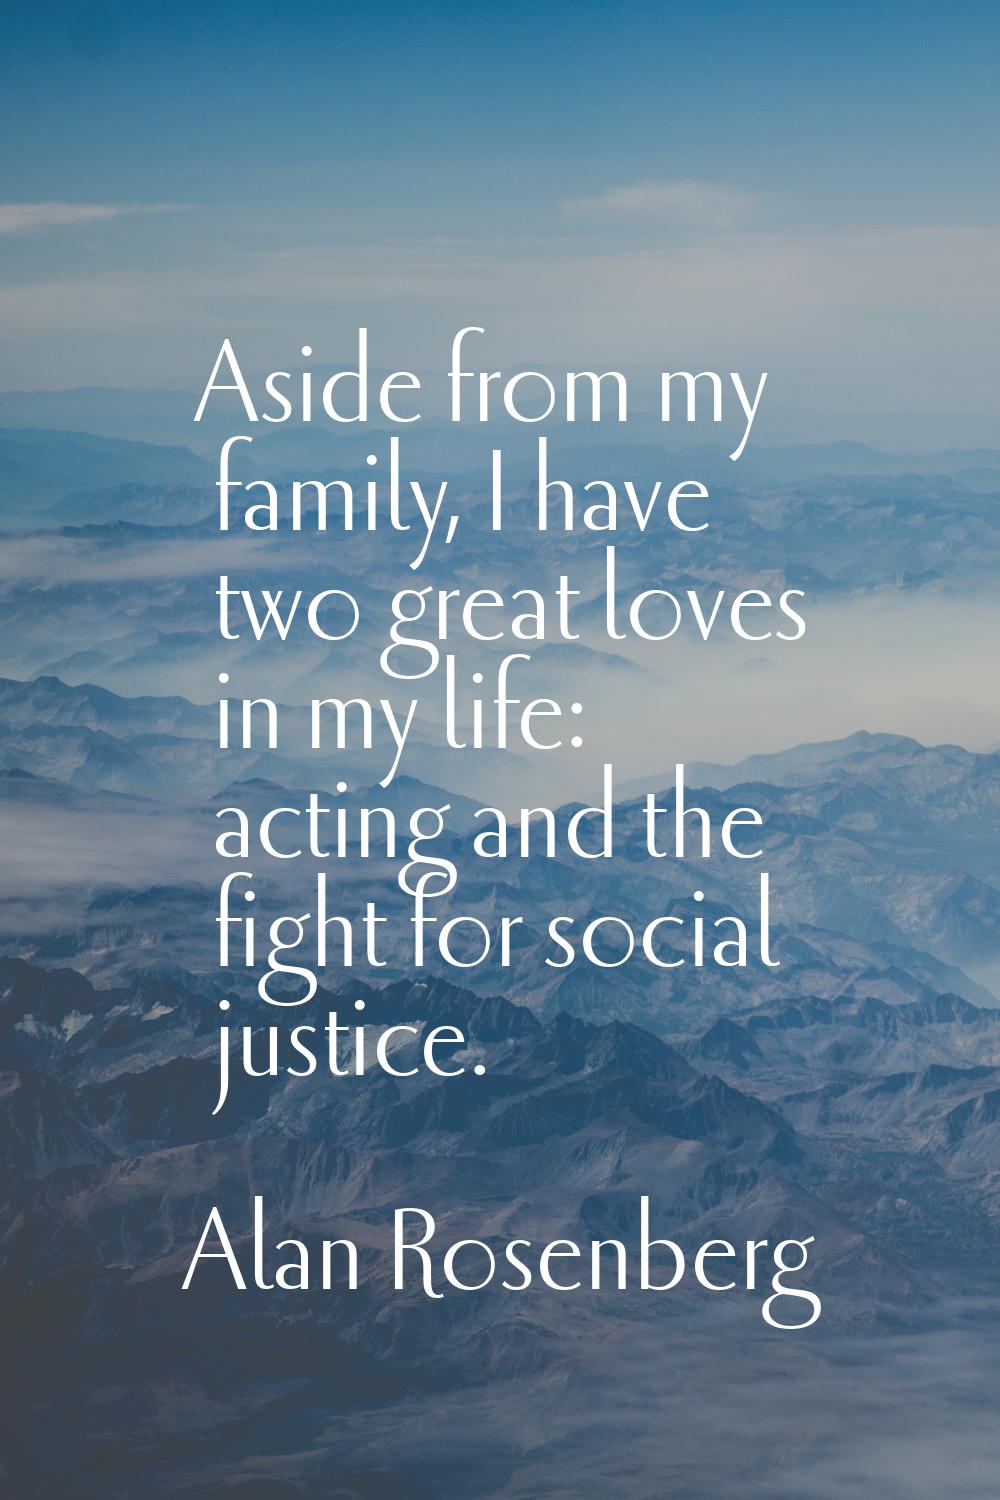 Aside from my family, I have two great loves in my life: acting and the fight for social justice.